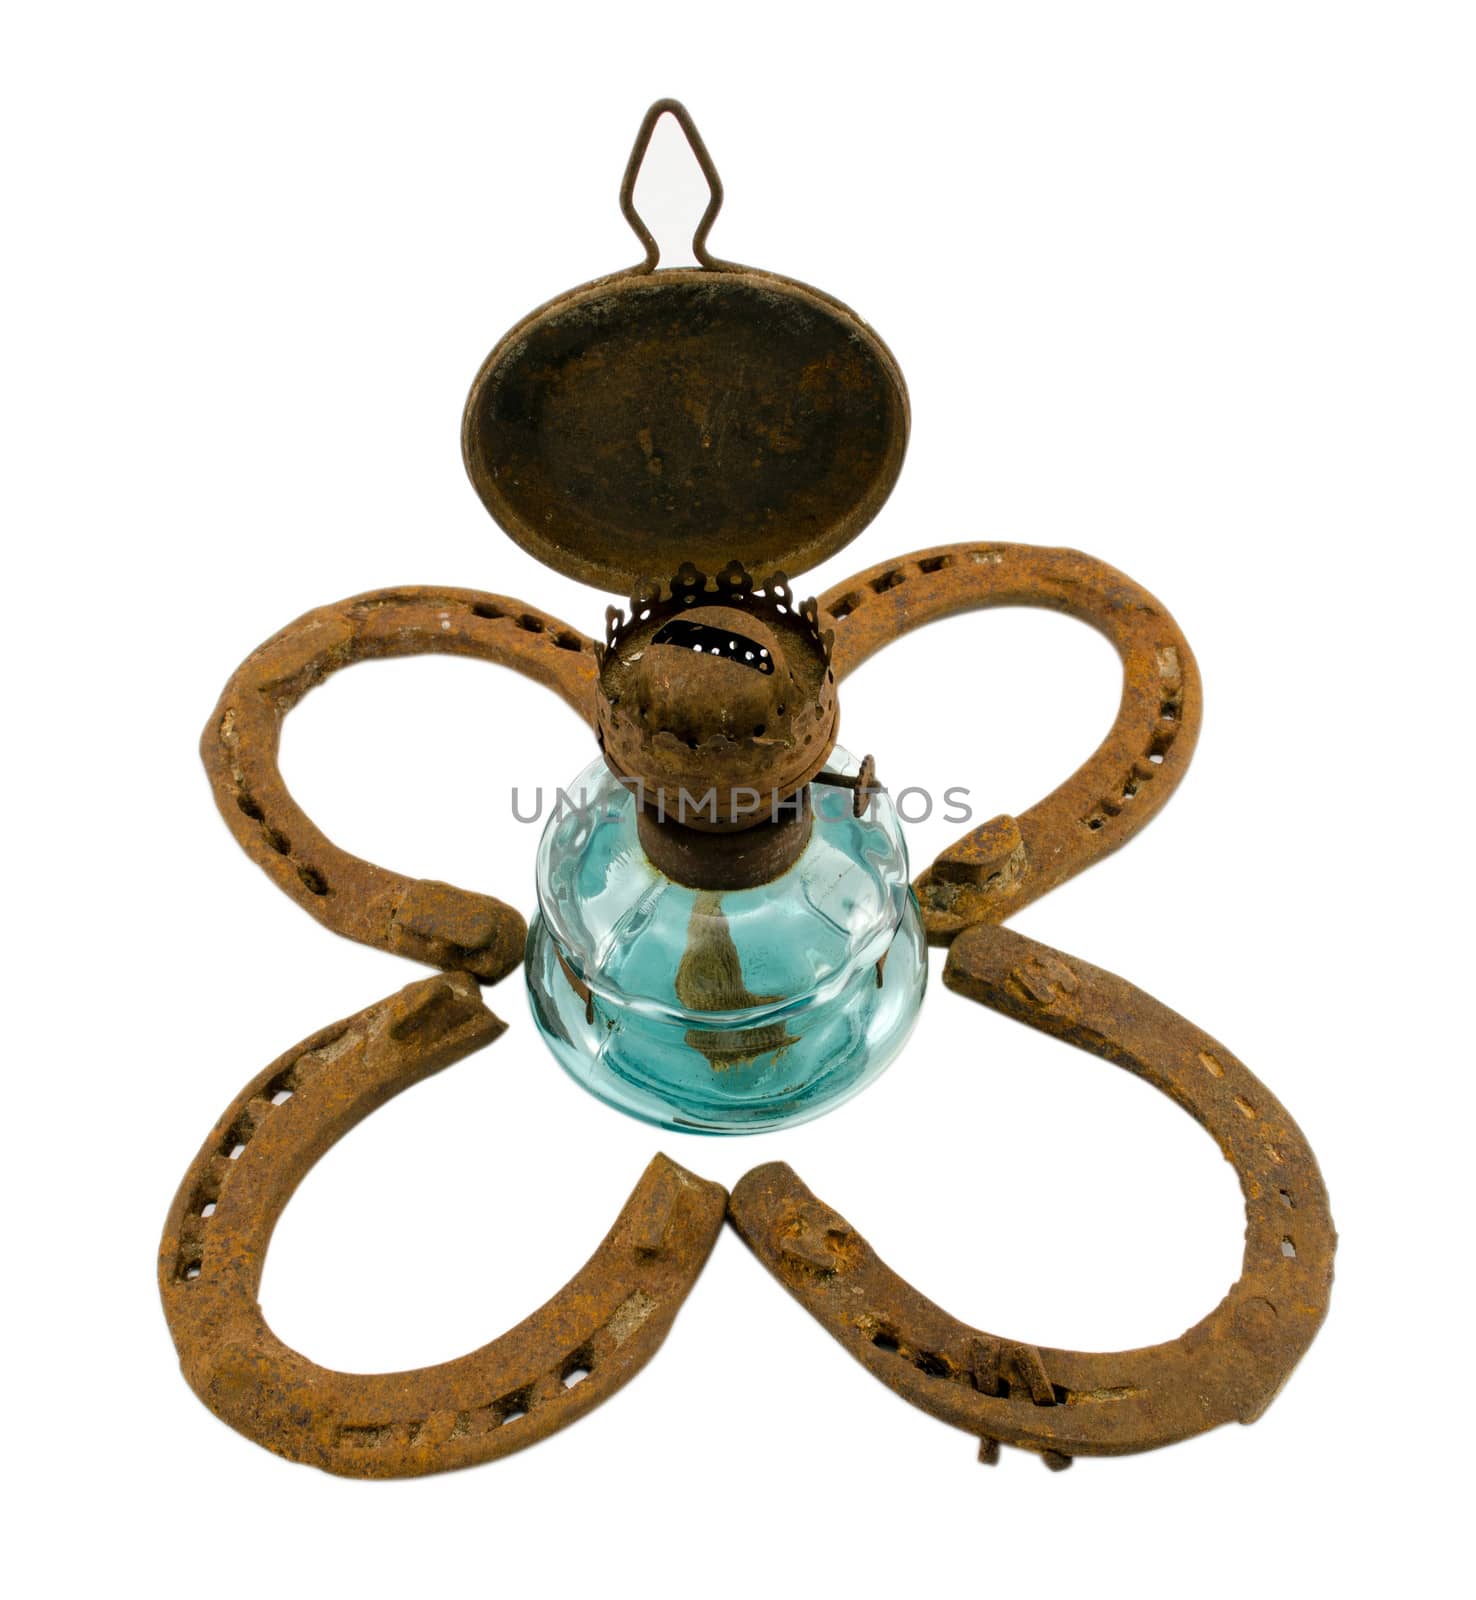 retro kerosene lamp in center of clover made of rusty horse shoes isolated on white background.